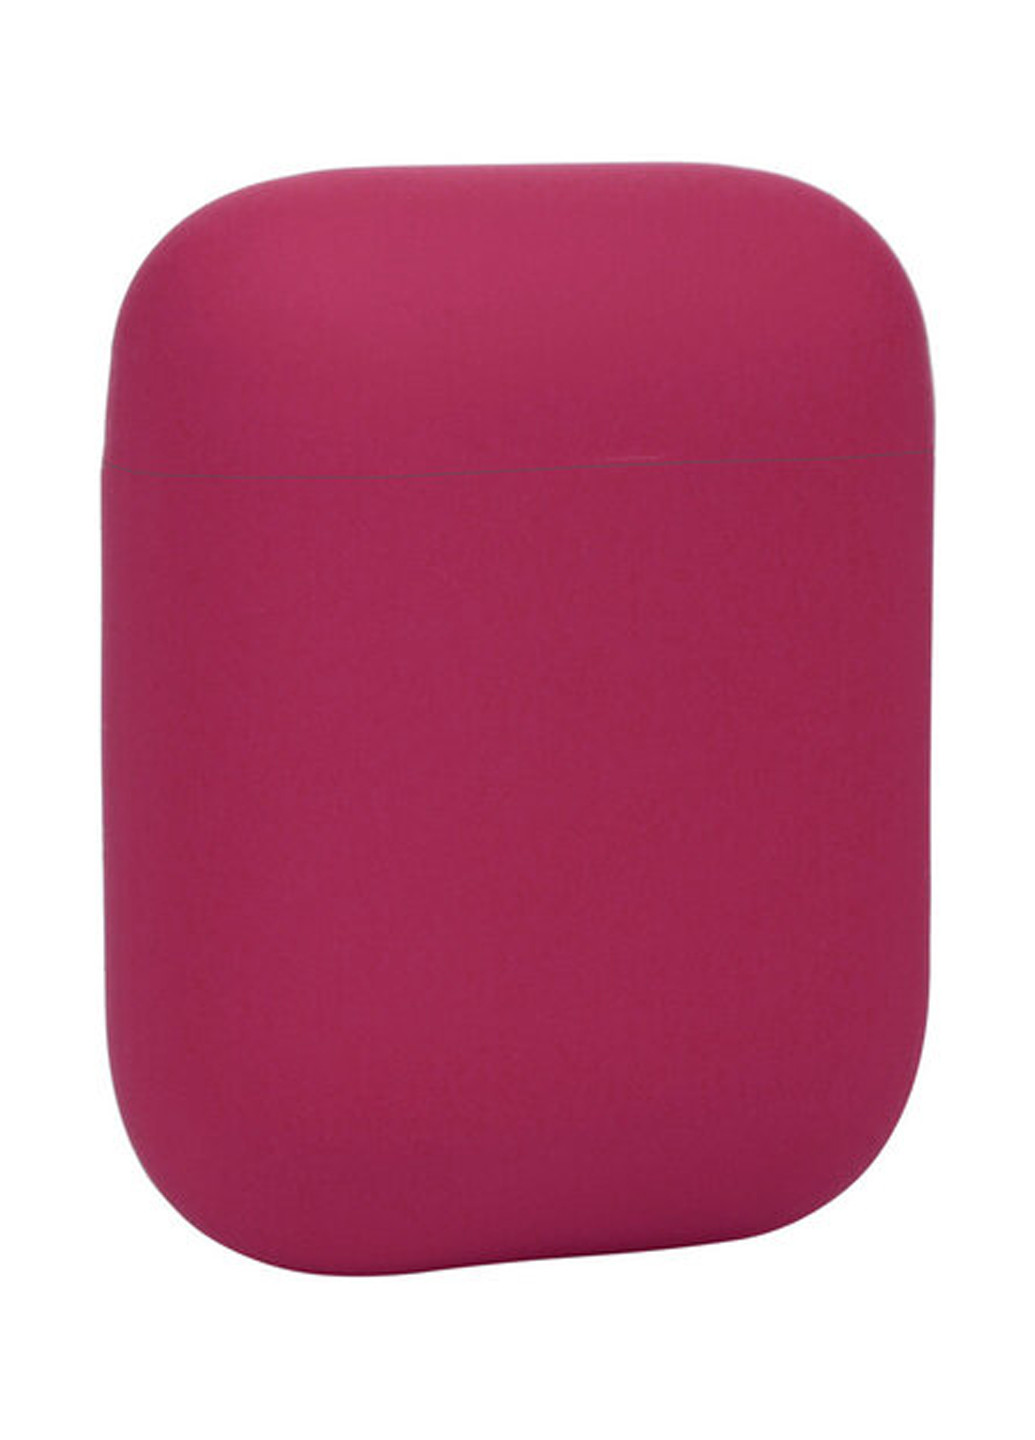 Чохол Silicon для Apple AirPods Rose Red (703351) BeCover silicon для apple airpods rose red (703351) (144451877)